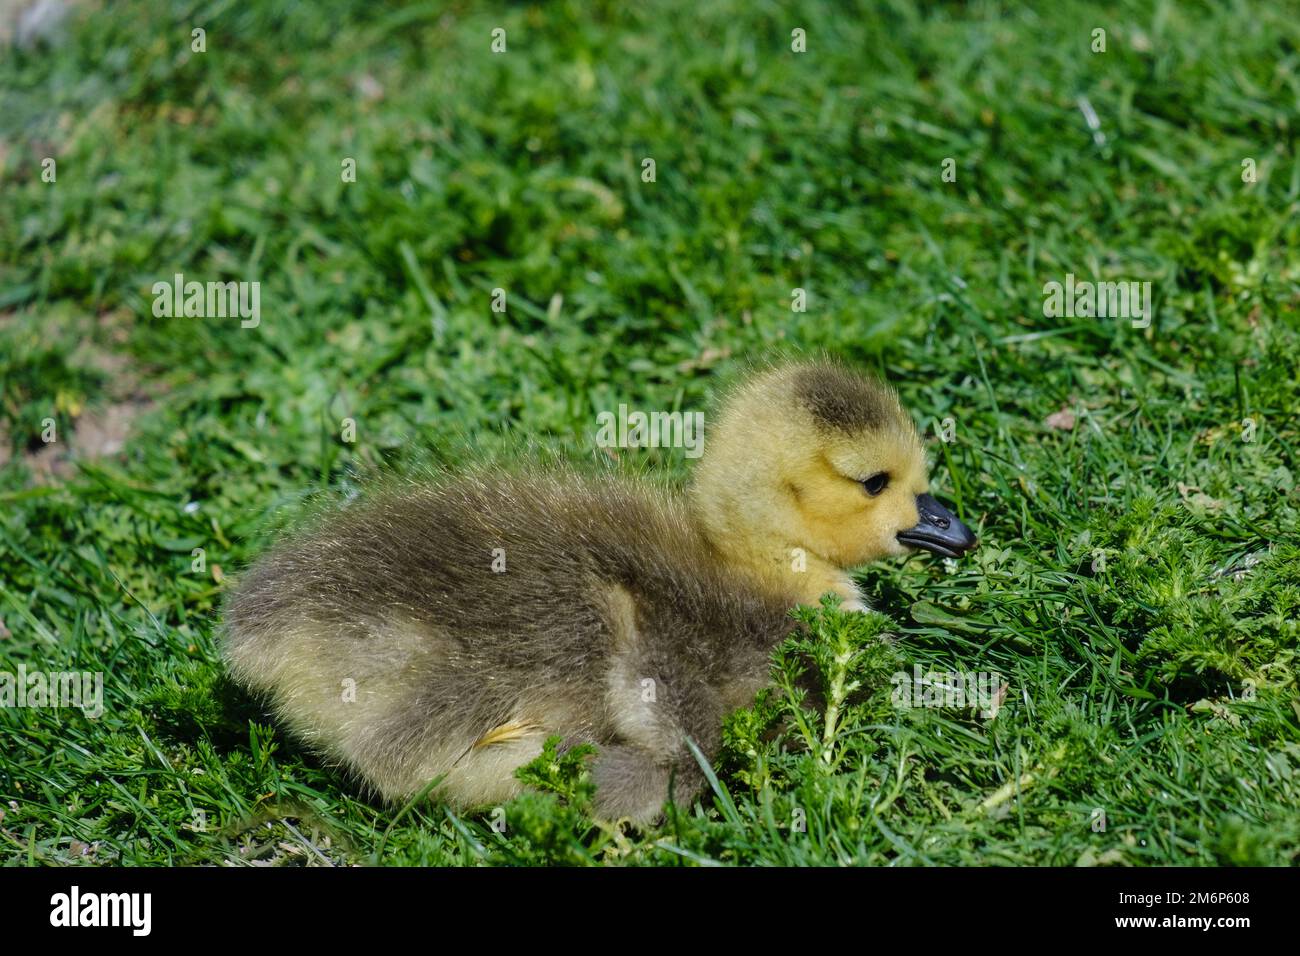 Gosling covered with soft, fluffy yellow and black down feathers sits in the grass, facing right. Stock Photo